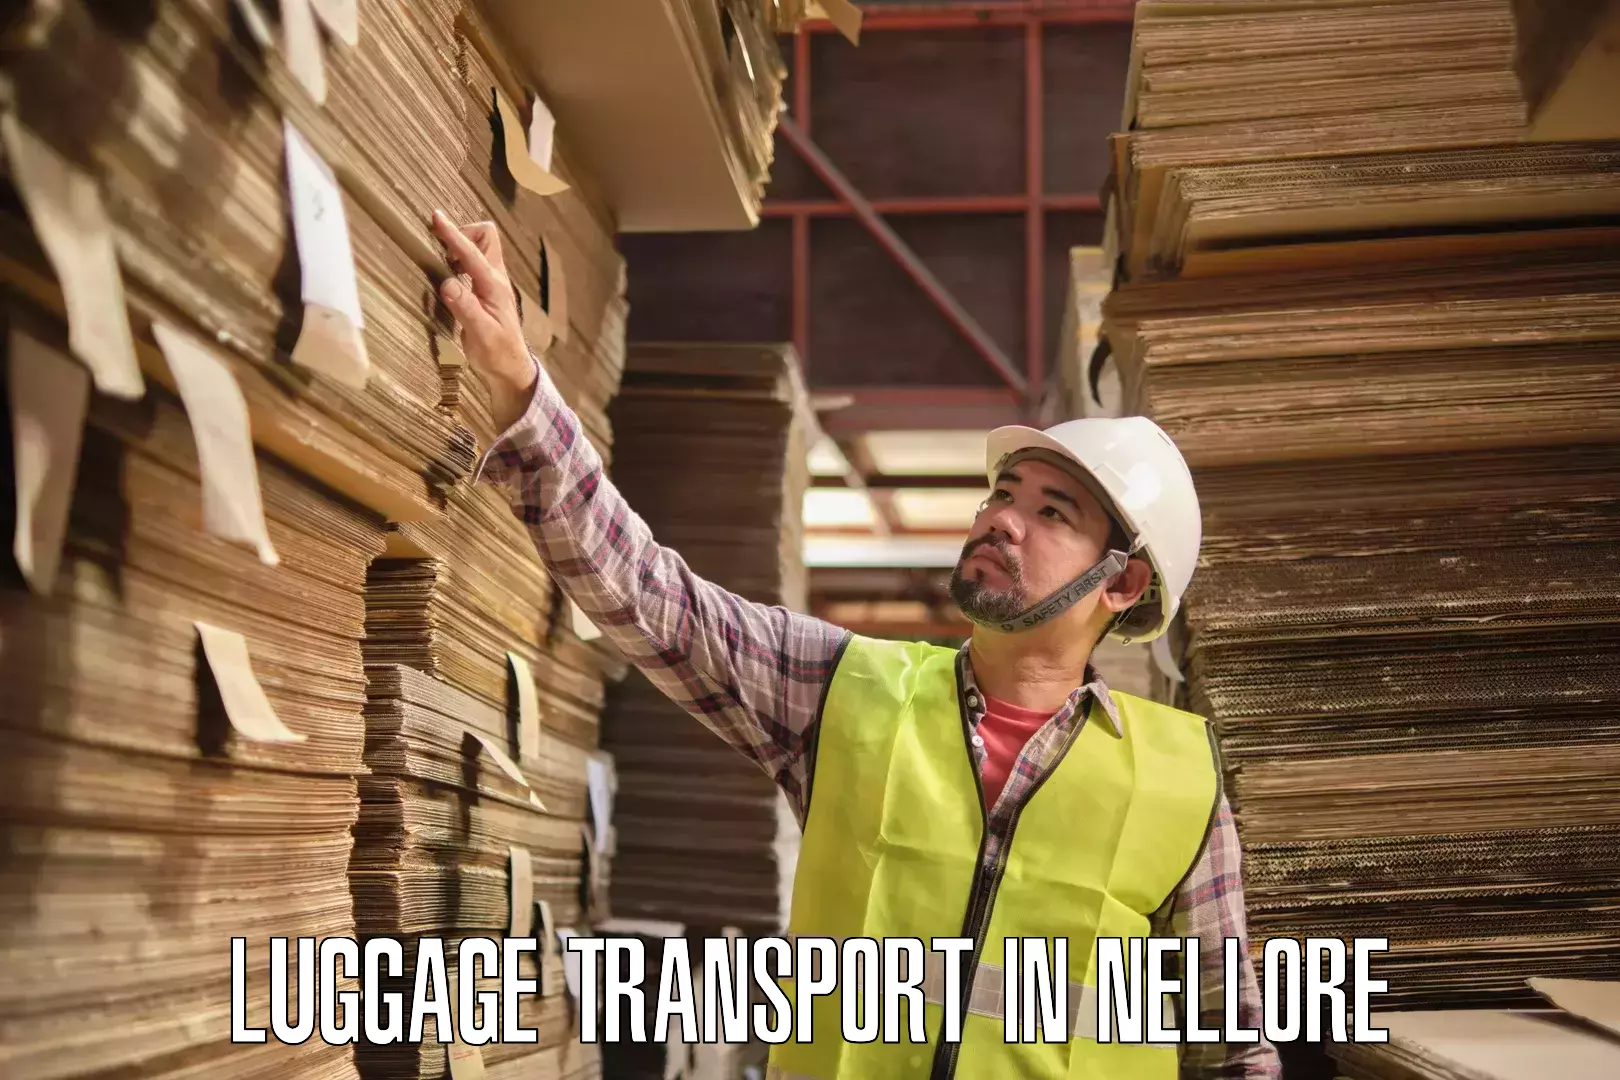 Baggage transport updates in Nellore